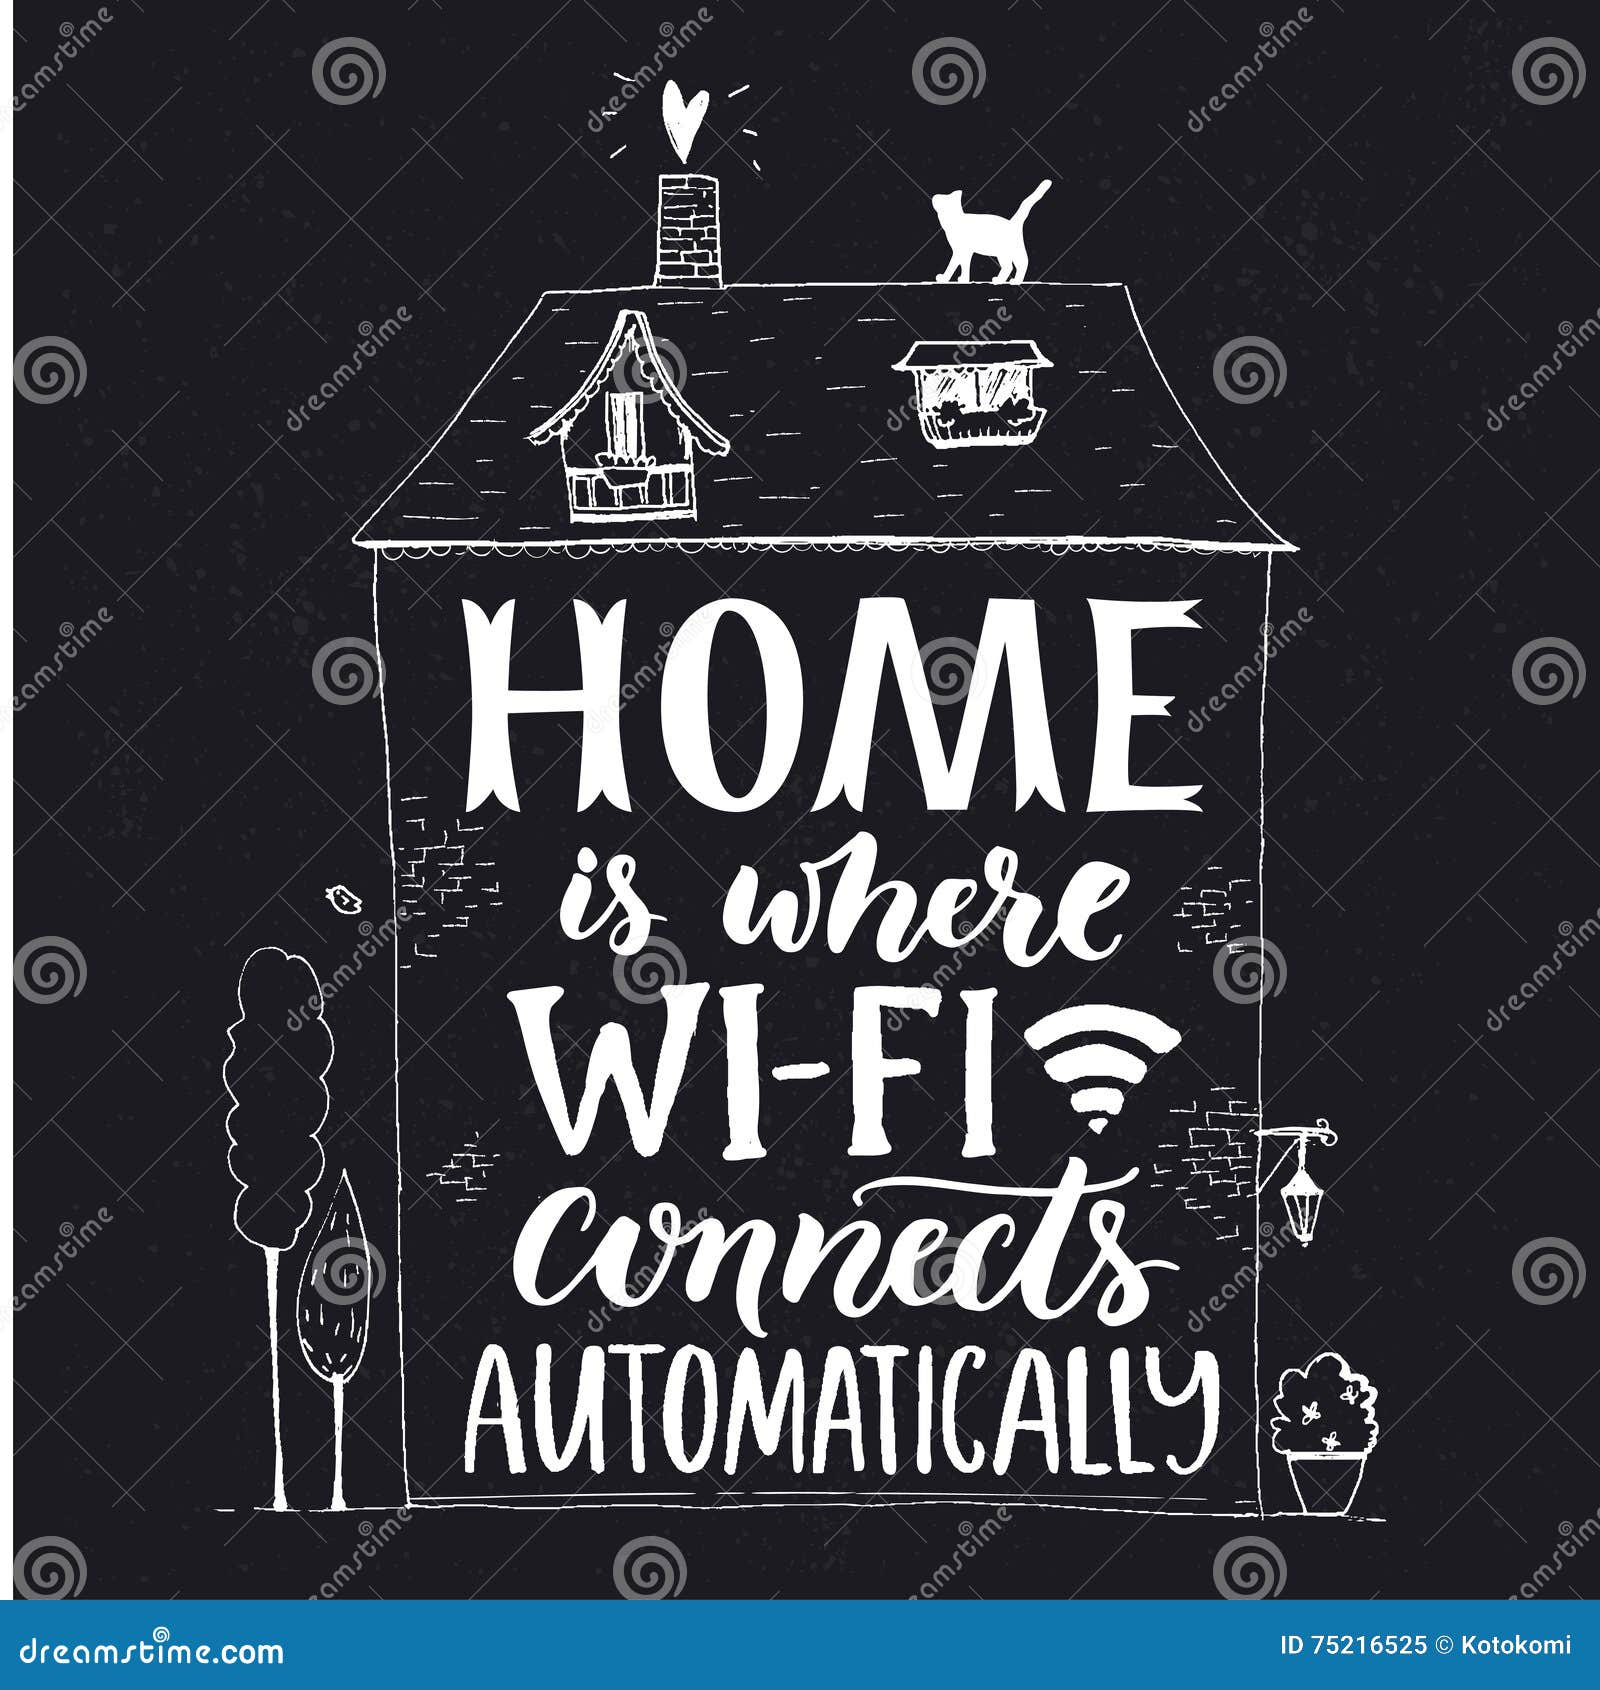 home is where wifi connects automatically. fun phrase about internet.